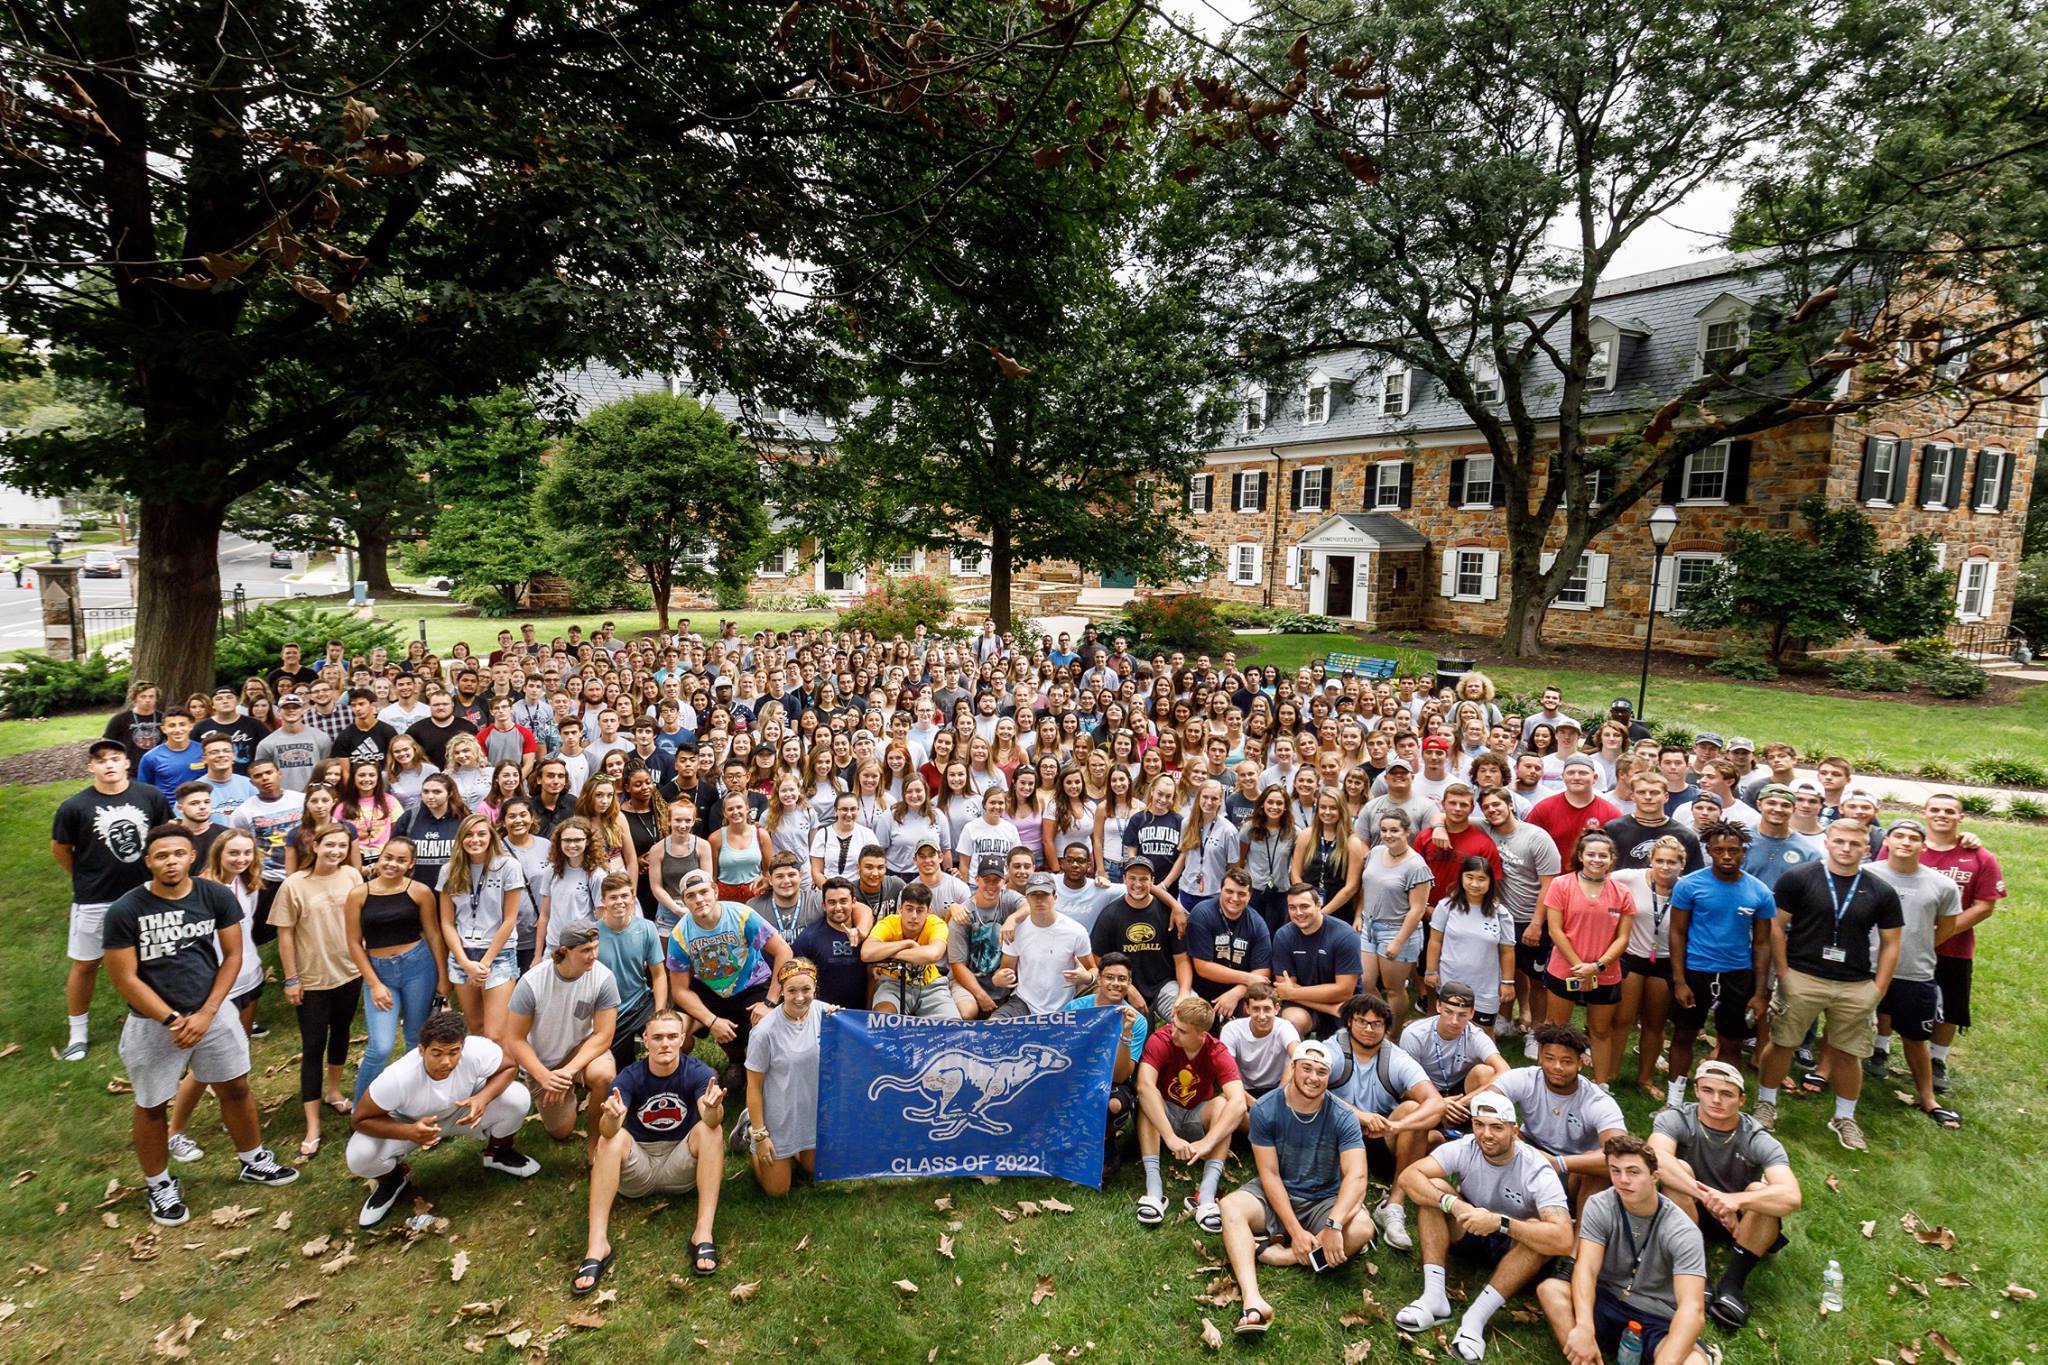 The freshmen class of 2022, which is about 450 students, is seated on the lawn looking up at the camera